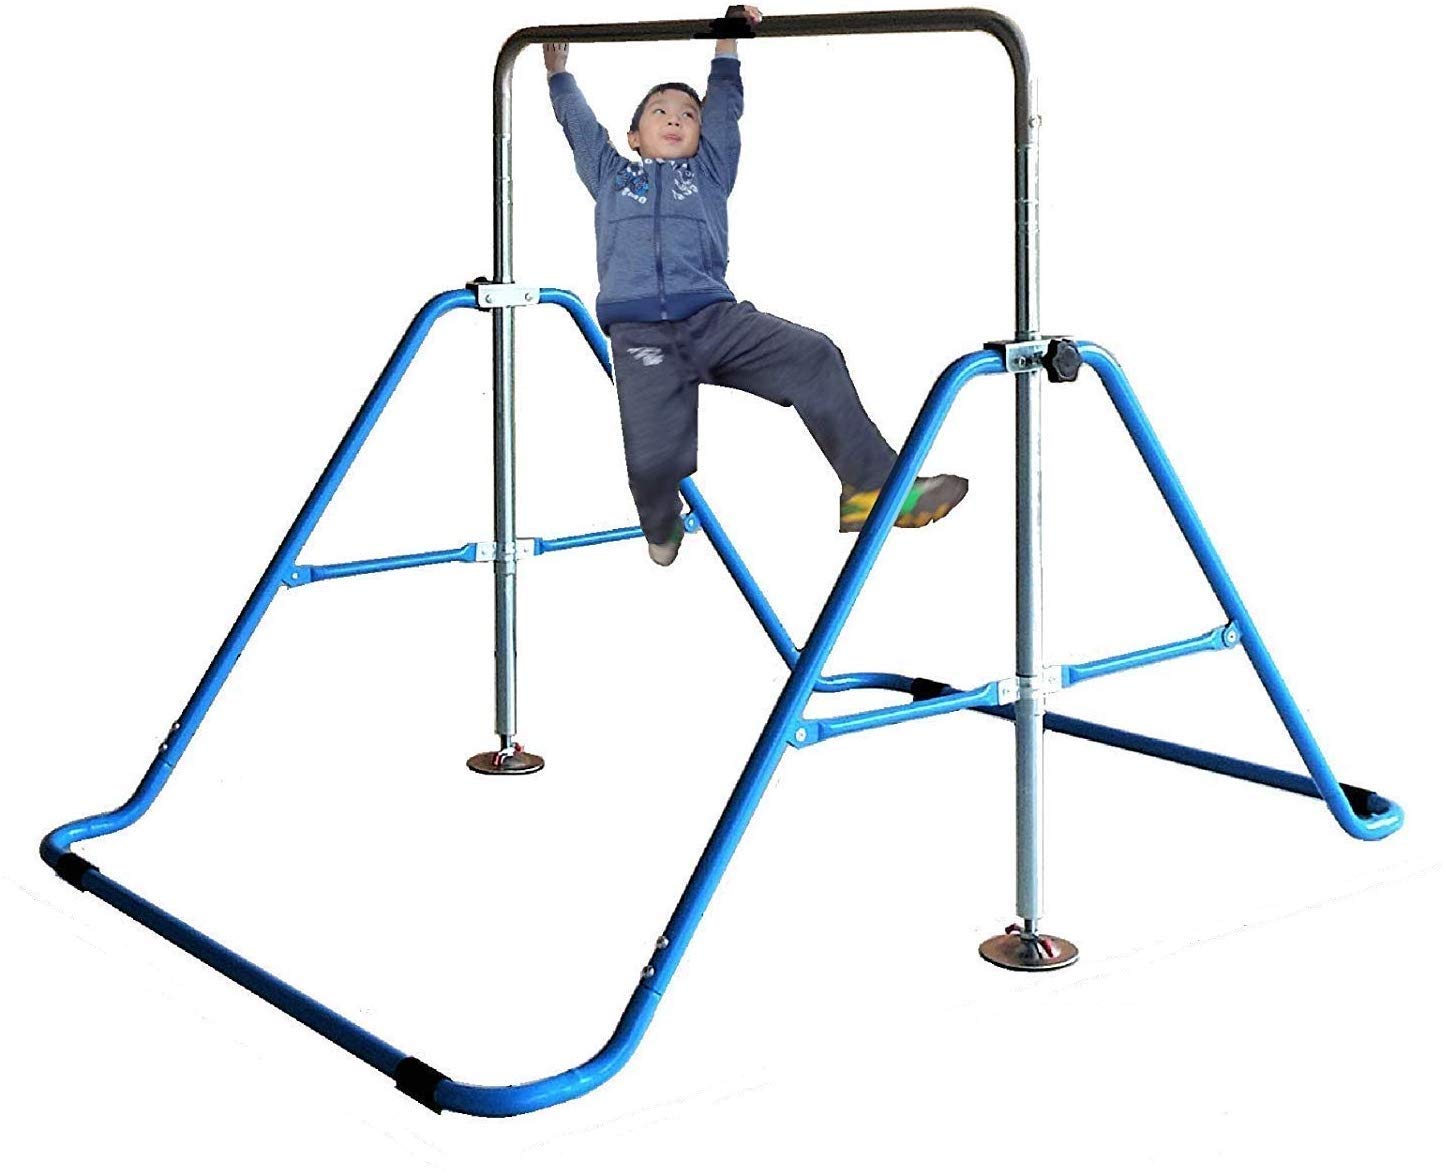 Looking to Buy Monkey Bars This Year: Discover the Best Options for Cheap, Heavy Duty & Portable Sets